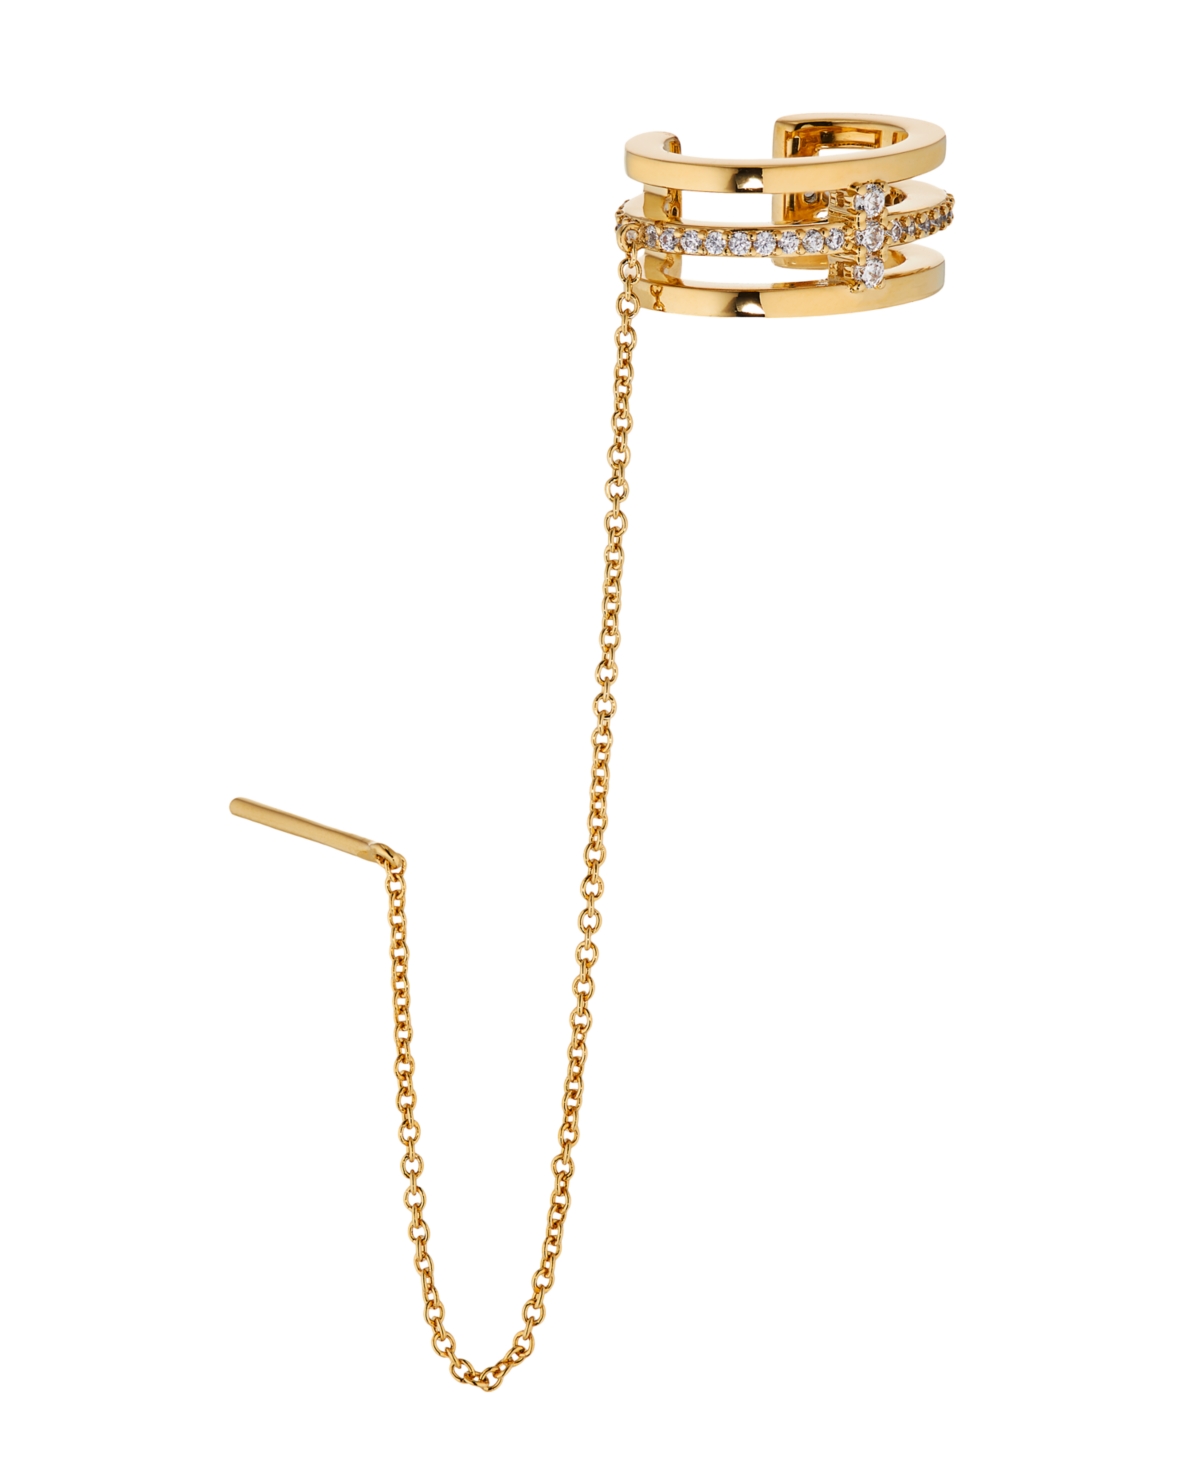 Earring Cuff and Threader Earring in 18K Gold Plated Brass - K Gold Plated